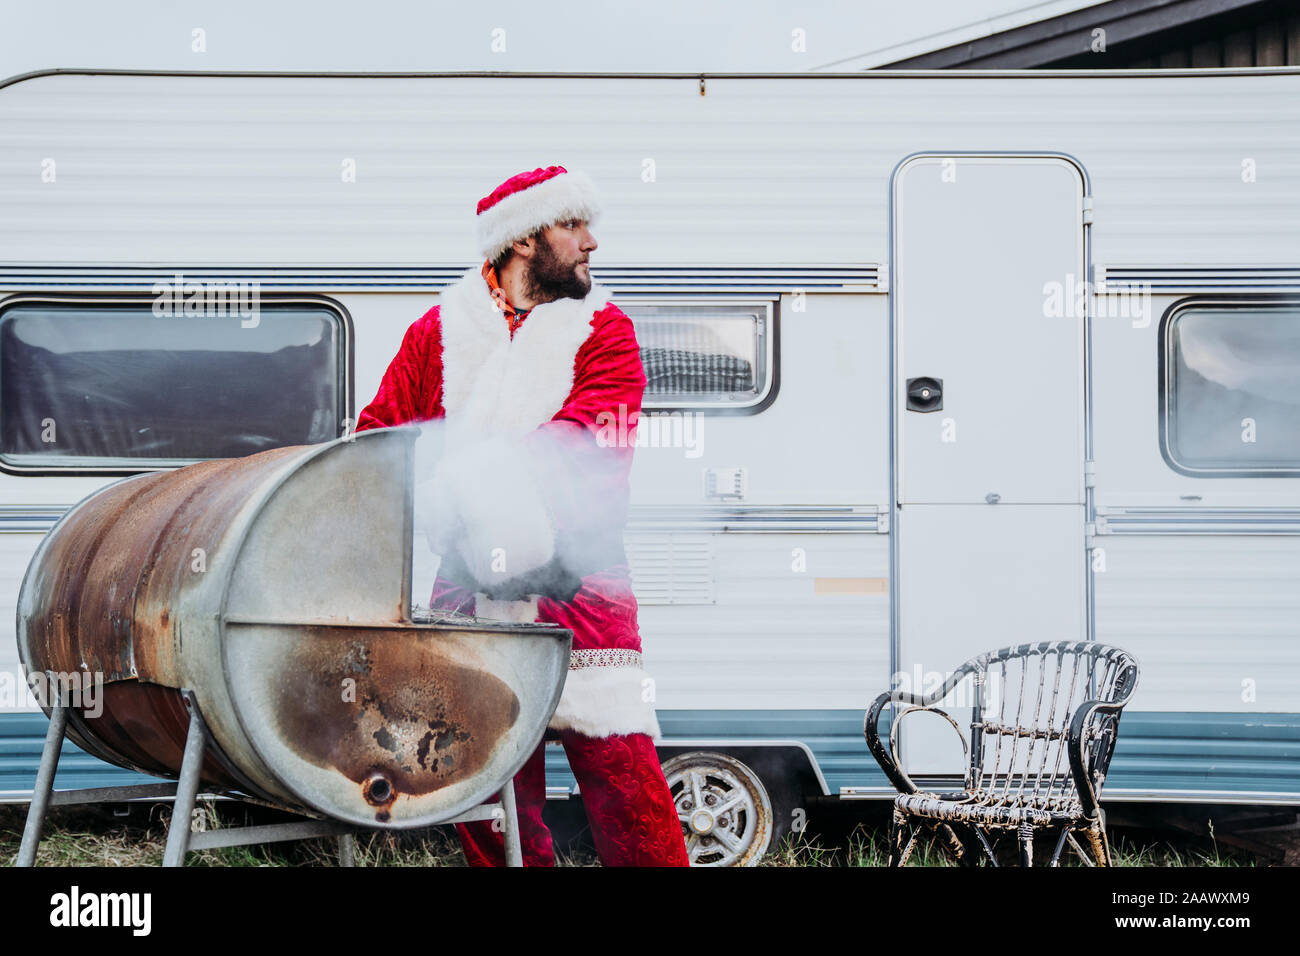 Santa claus preparing a barbecue in front of a camper Stock Photo